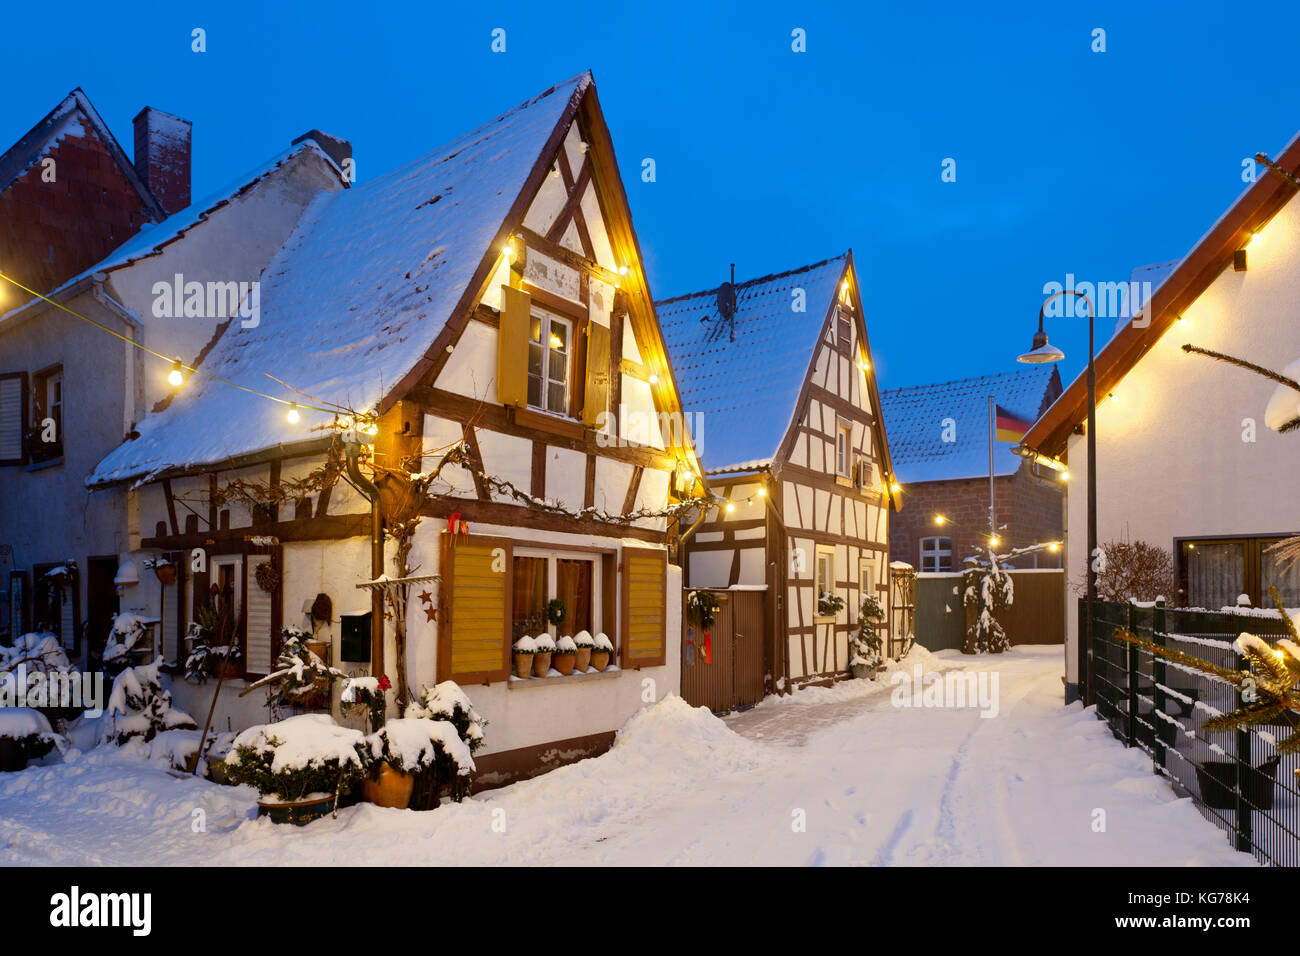 An old village street with half-timbered houses and christmas lights at night during snowfall in Lachen, Neustadt an der Weinstrasse, Germany. Stock Photo